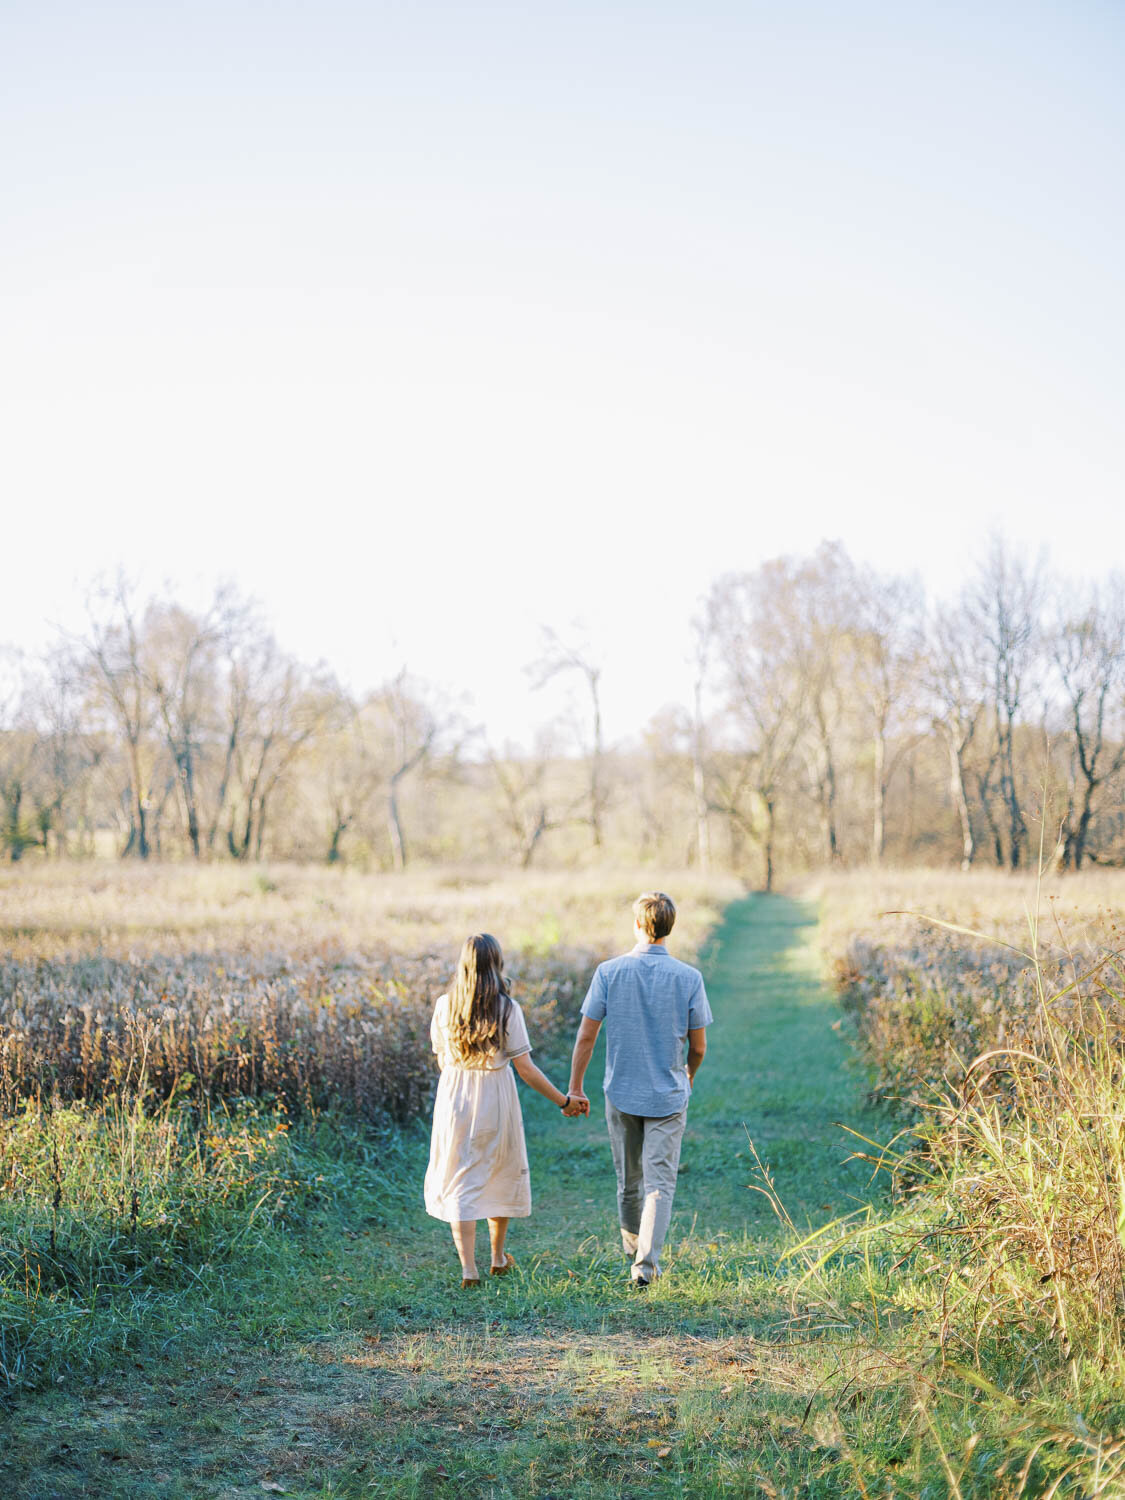 man-and-woman-walking-through-field-during-golden-hour-for-their-fall-engagement-session.jpg